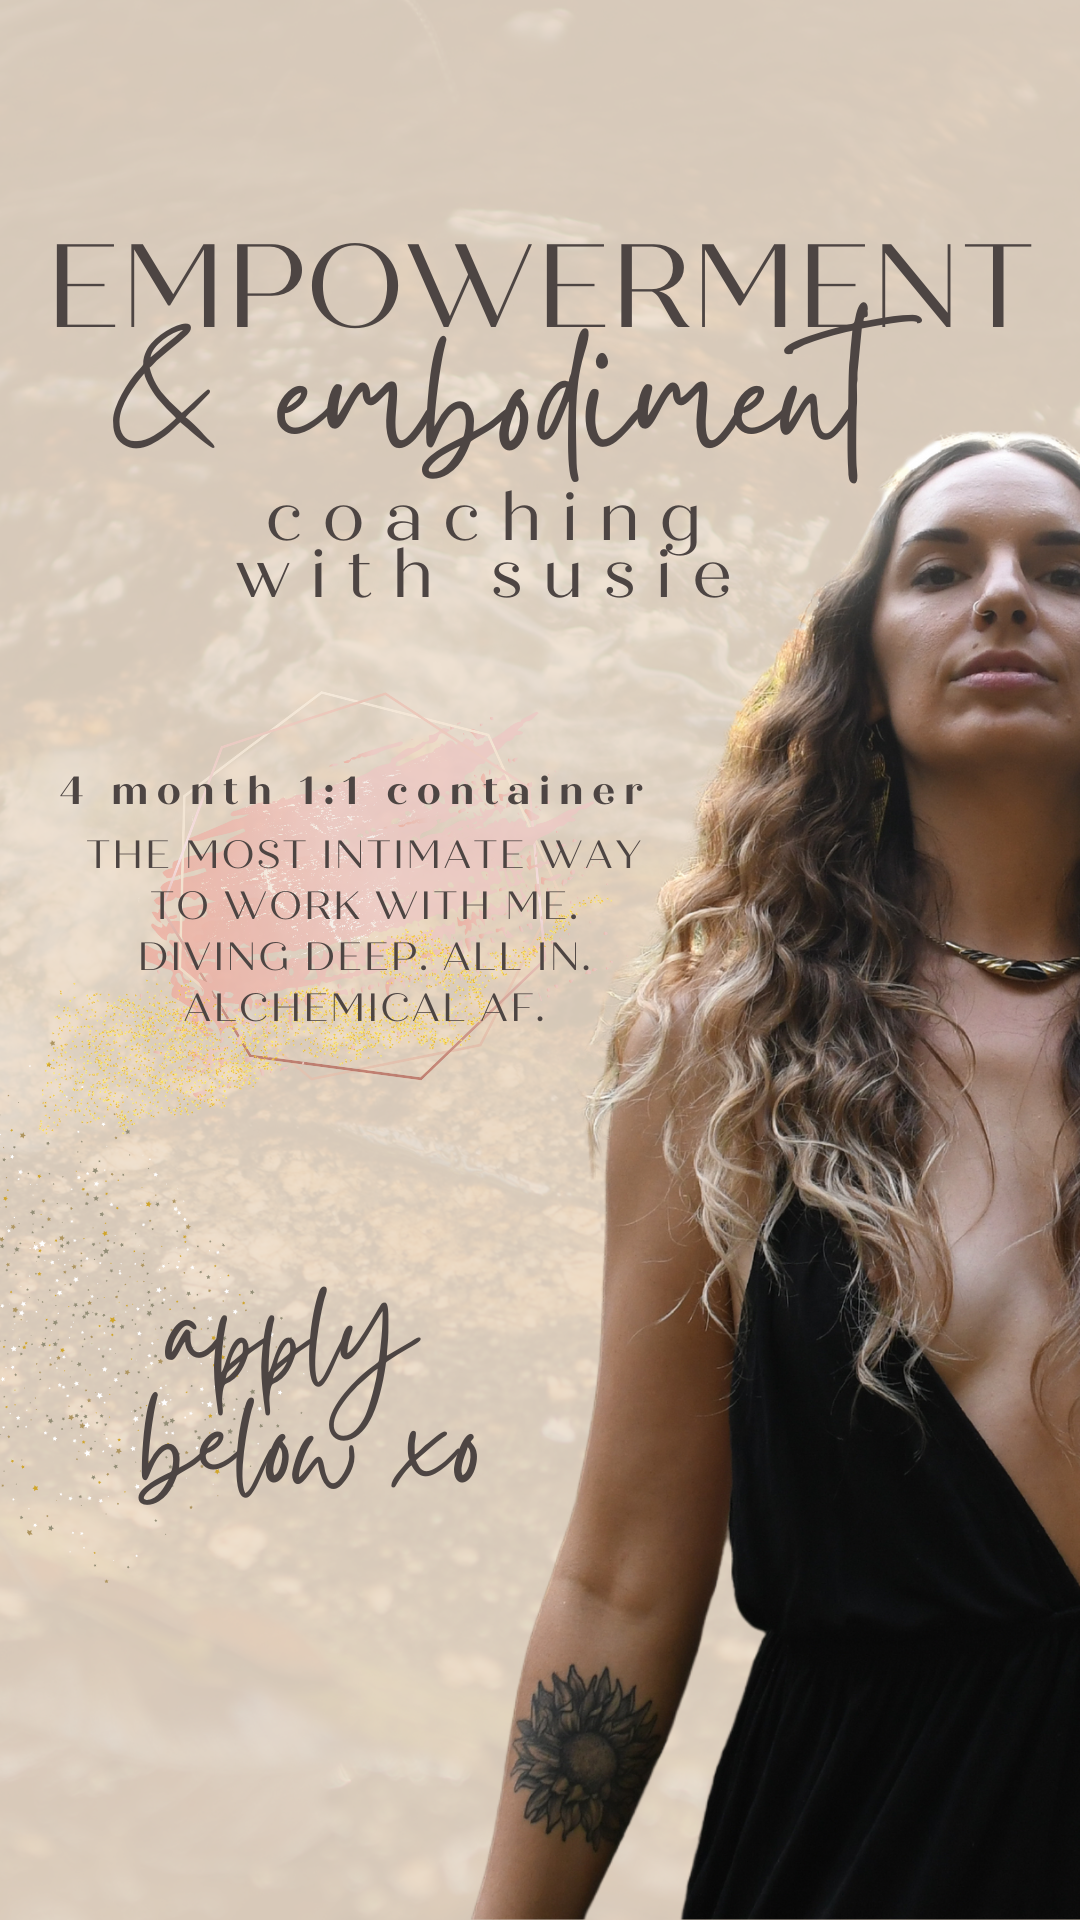 empowerment & embodiment coaching sacred with susie mobile